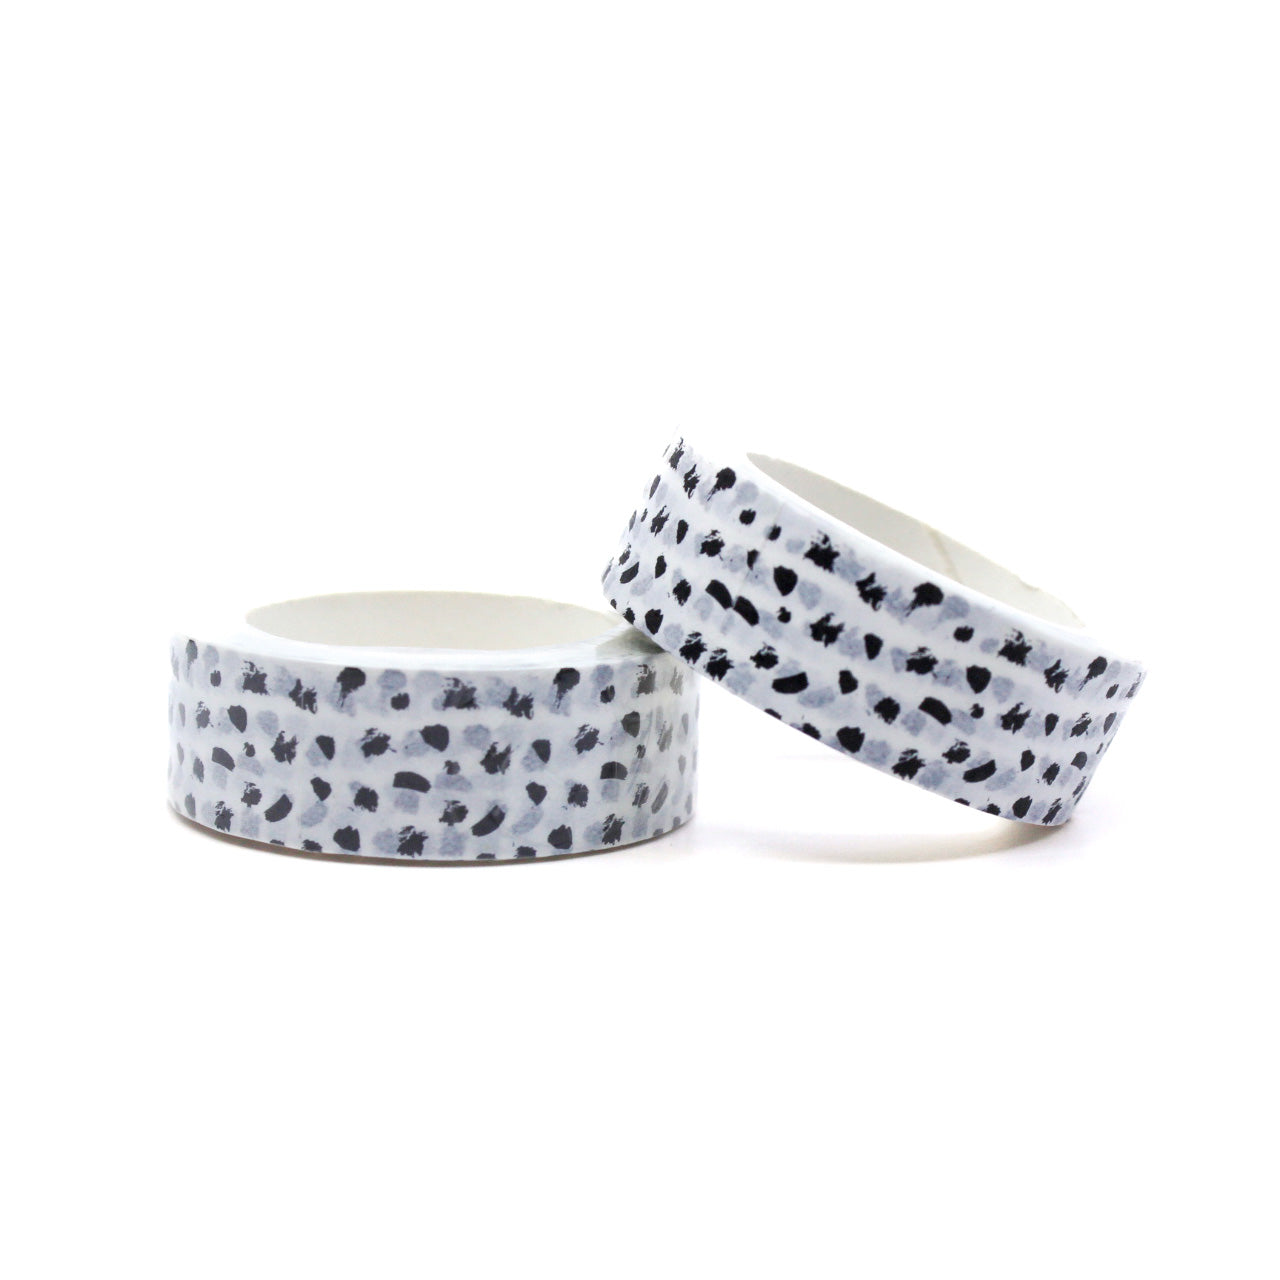 Add a touch of contemporary flair to your projects with this washi tape featuring a modern abstract black and white dots design. Perfect for adding a stylish accent to your crafts. This tape is sold at BBB Supplies Craft Shop.